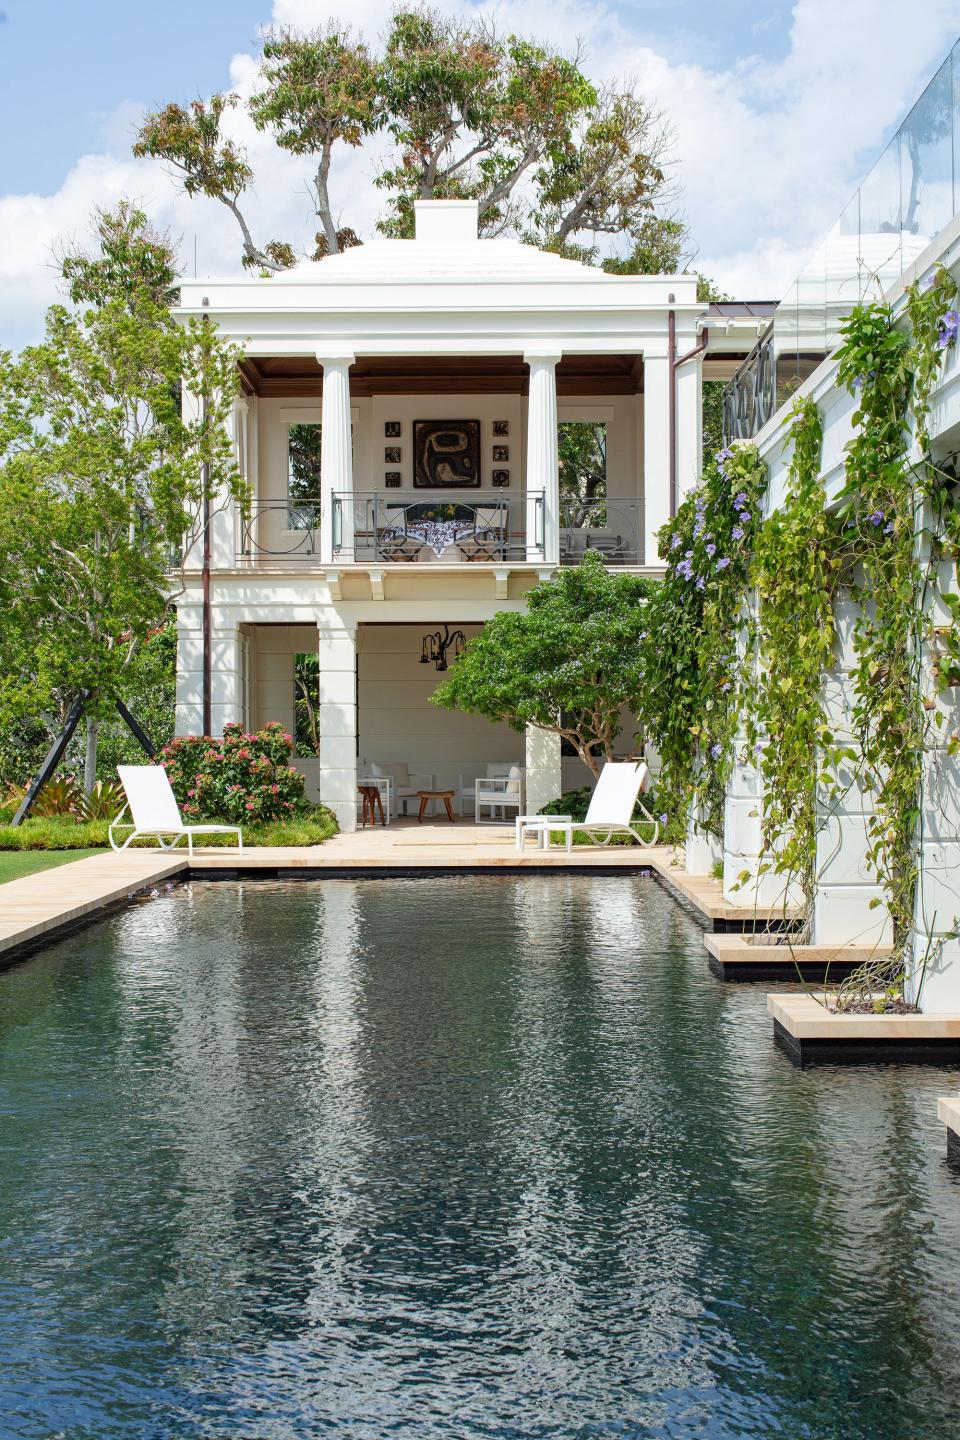 On the northwest corner of 726 Hi Mount Road in Palm Beach, a two-story open-air pavilion offers space for dining on the upper level and a lounge area for the main pool on the lower level. The house was recognized for excellence in new architecture at an April 12 ceremony at the Preservation Foundation of Palm Beach.